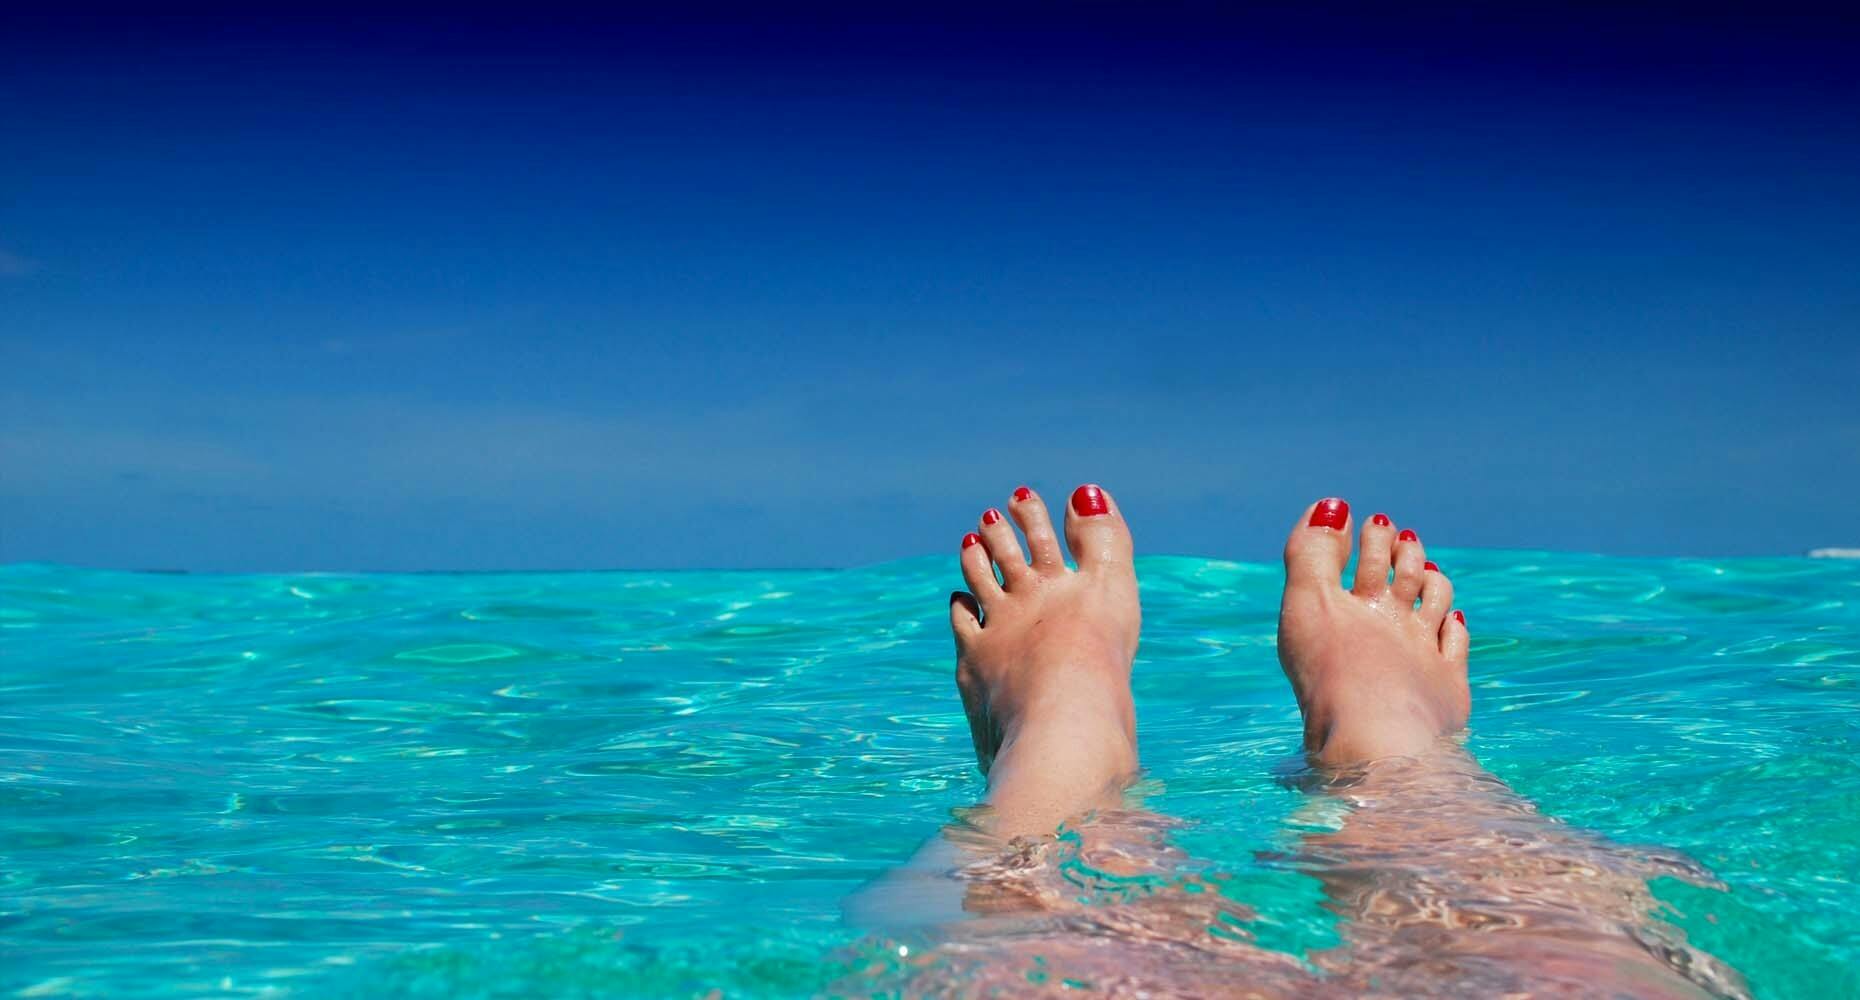 Feet on vacation in clear ocean